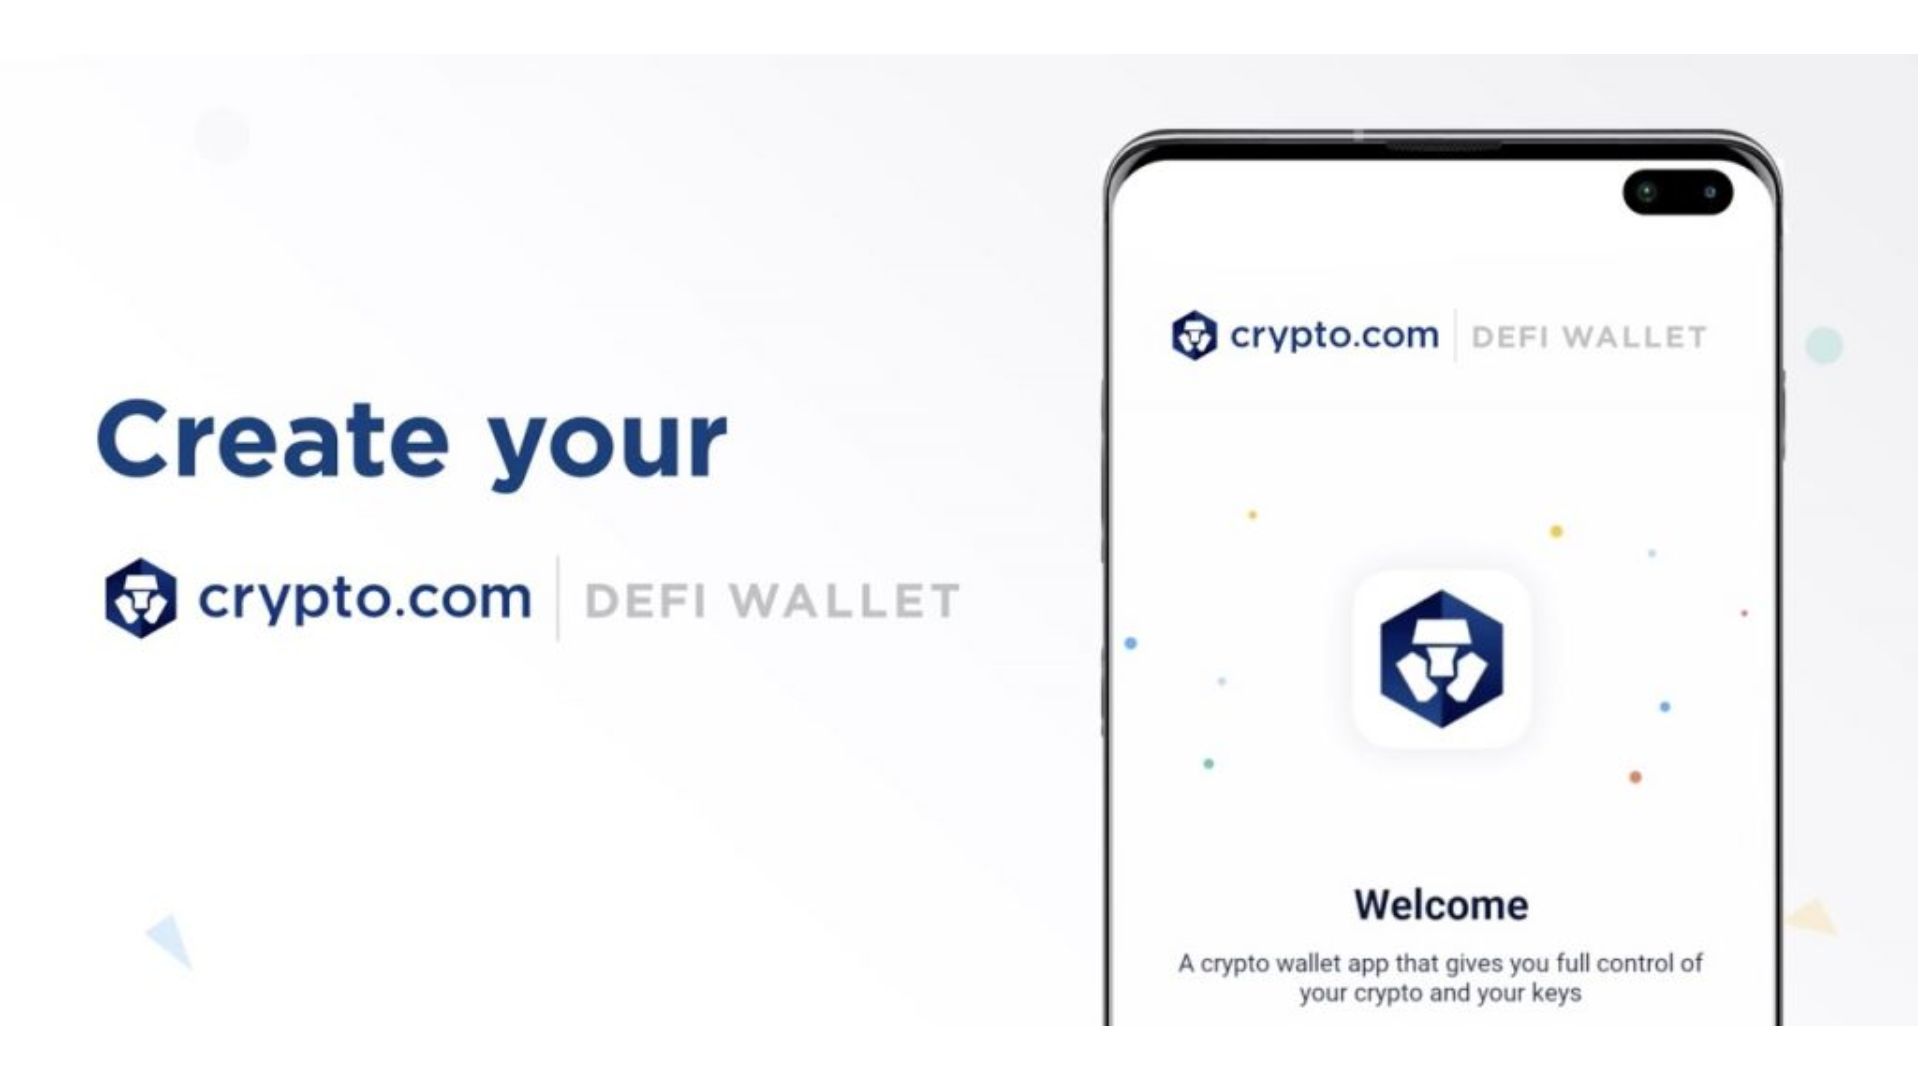 Link Your Crypto.com App to the DeFi Wallet.